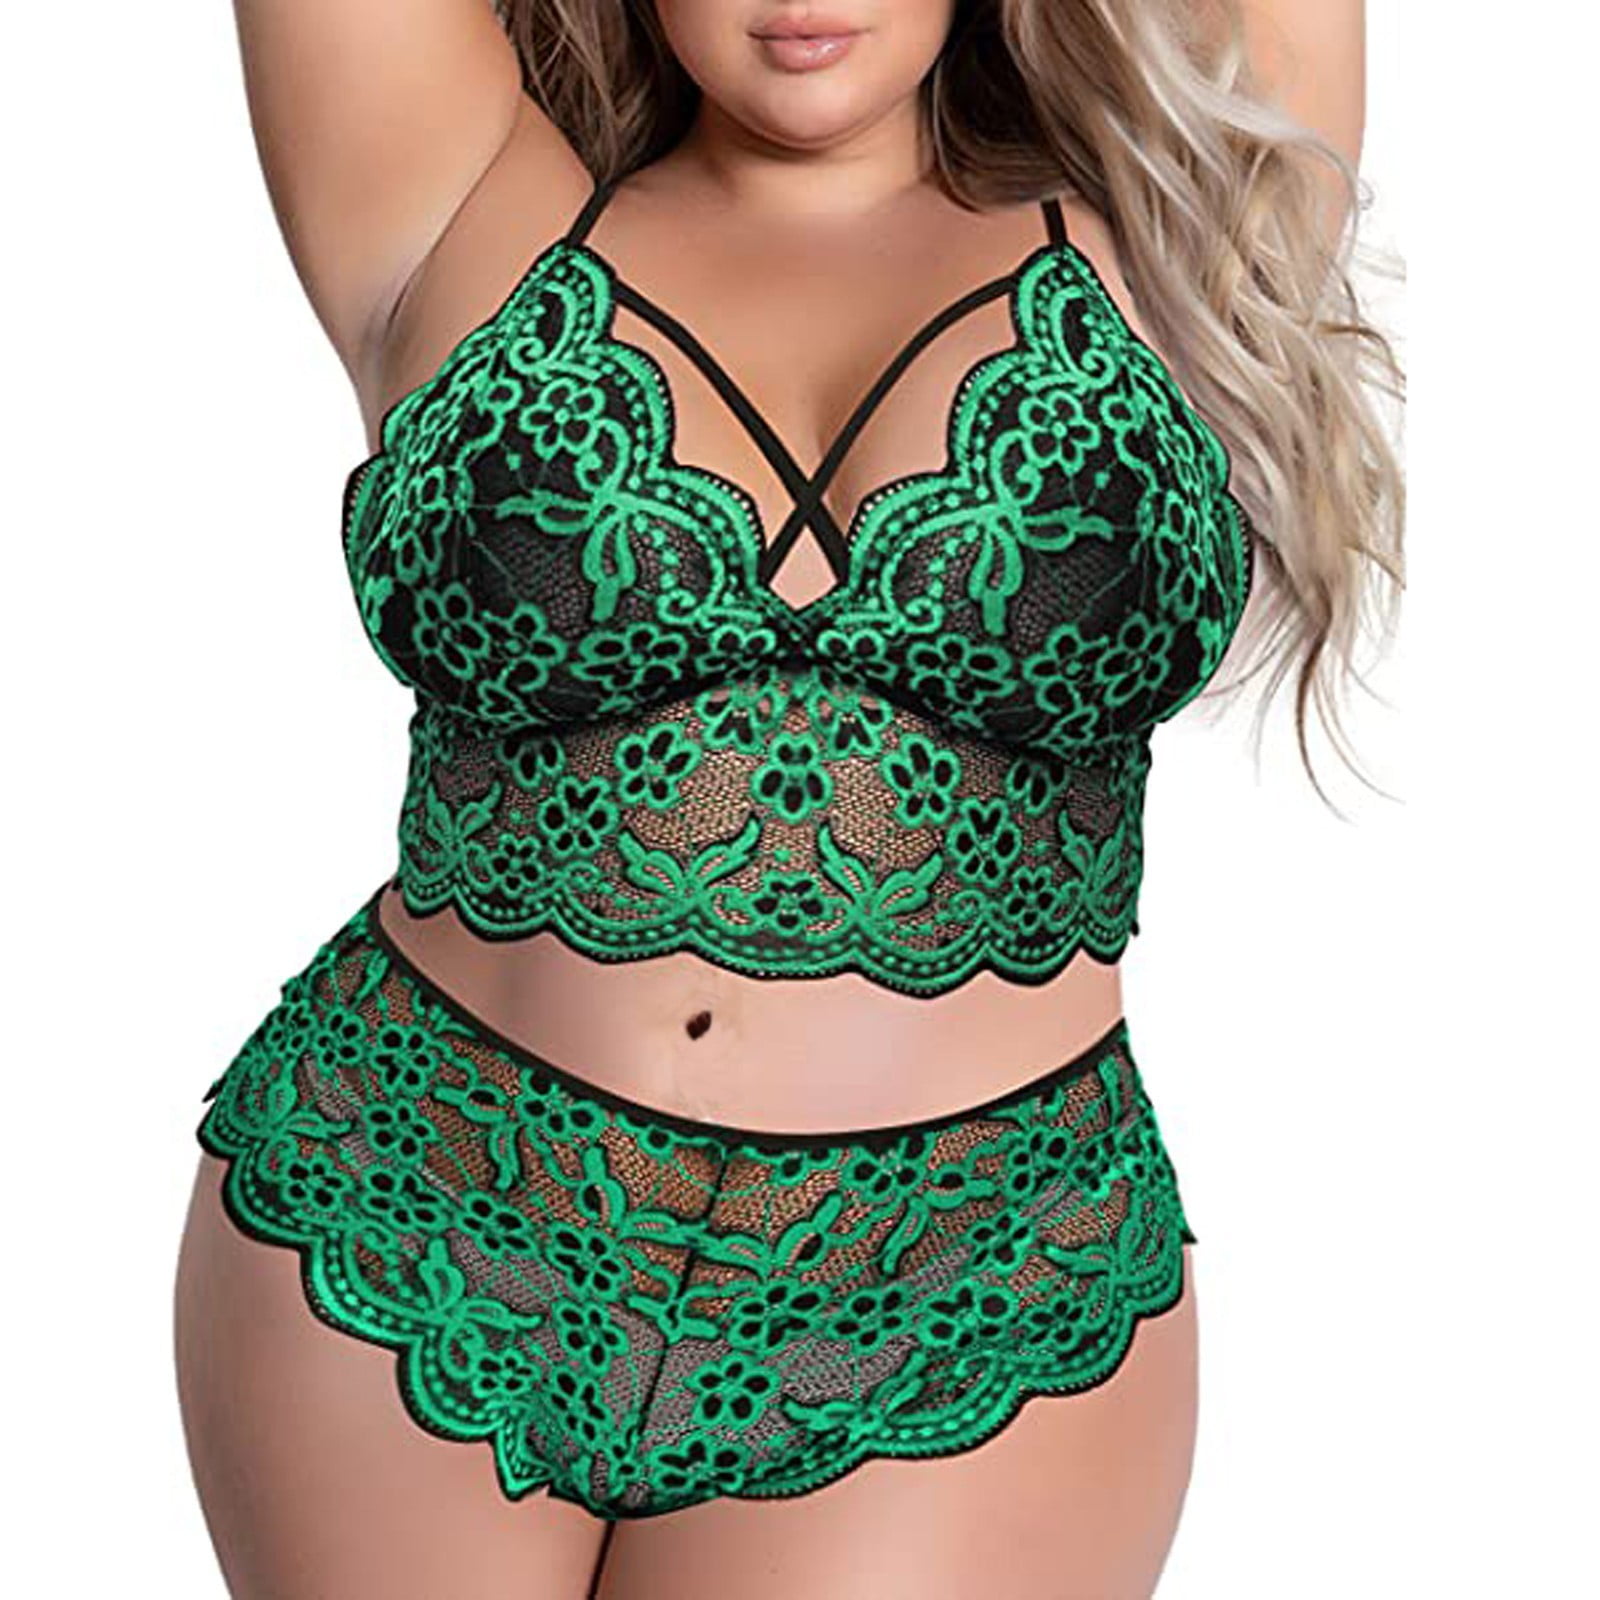 Dorina Thrive 2-pack lace lingerie set in green and red